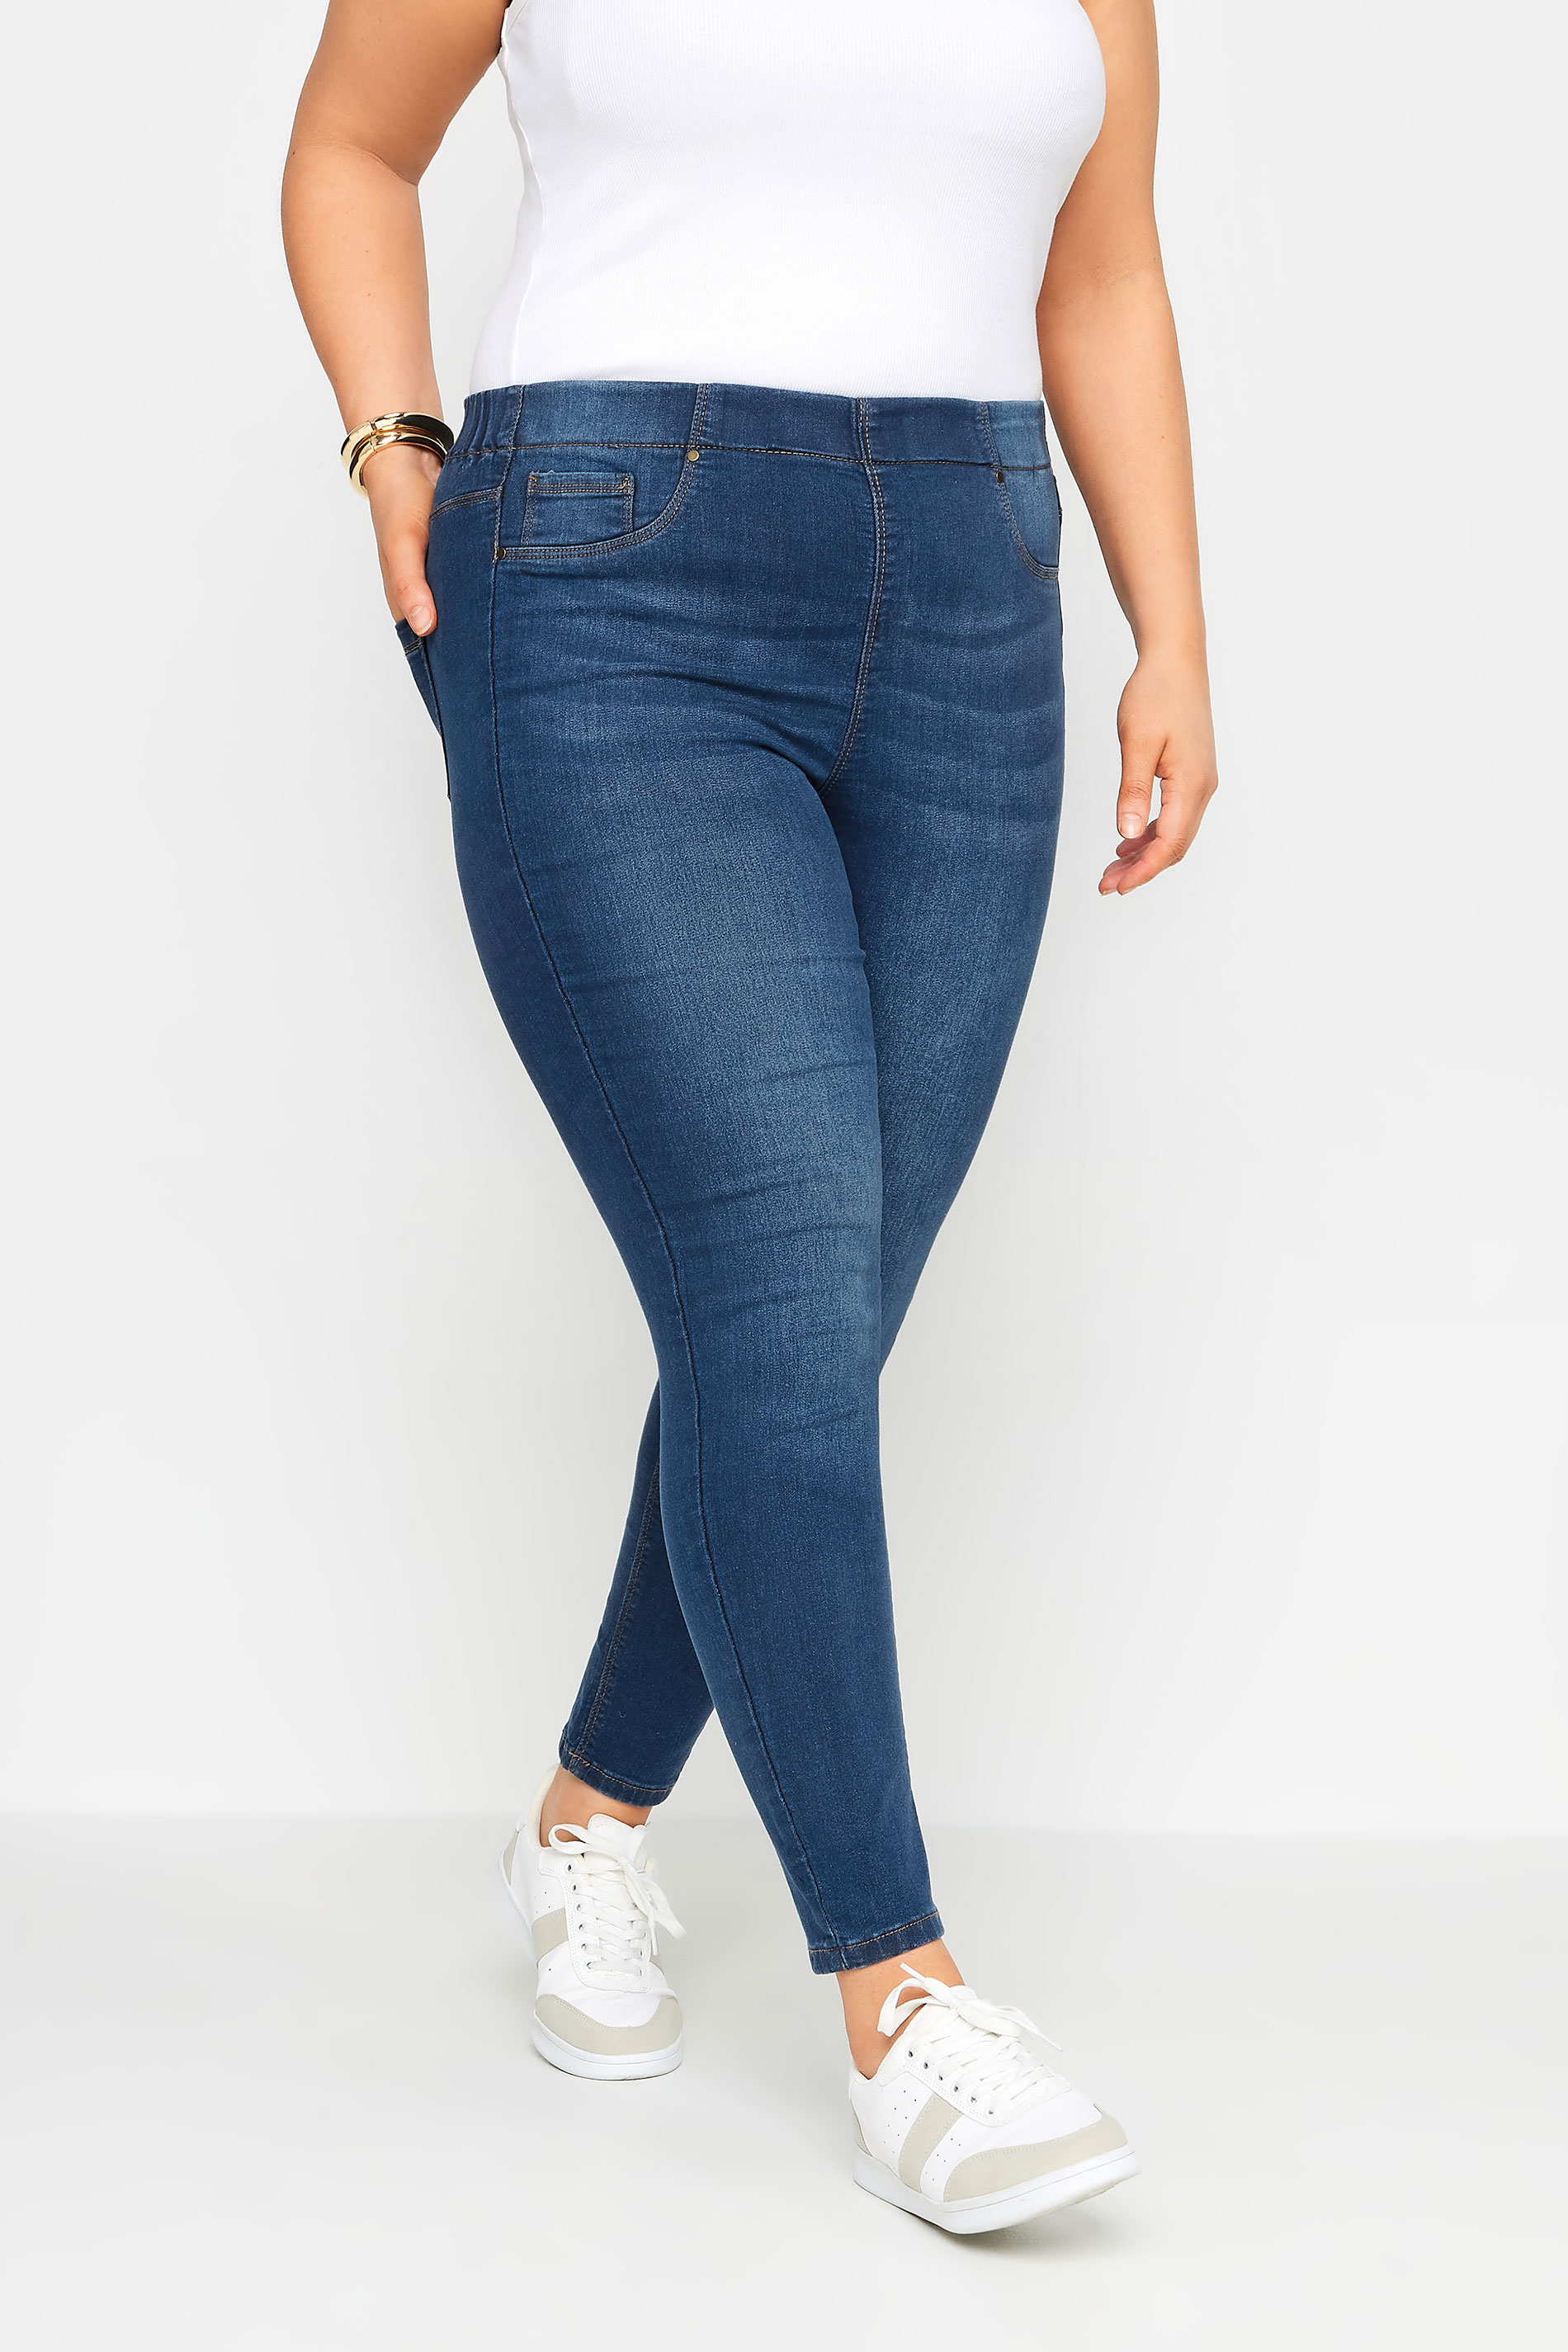 Women's Blue Jeggings gifts - up to −83%